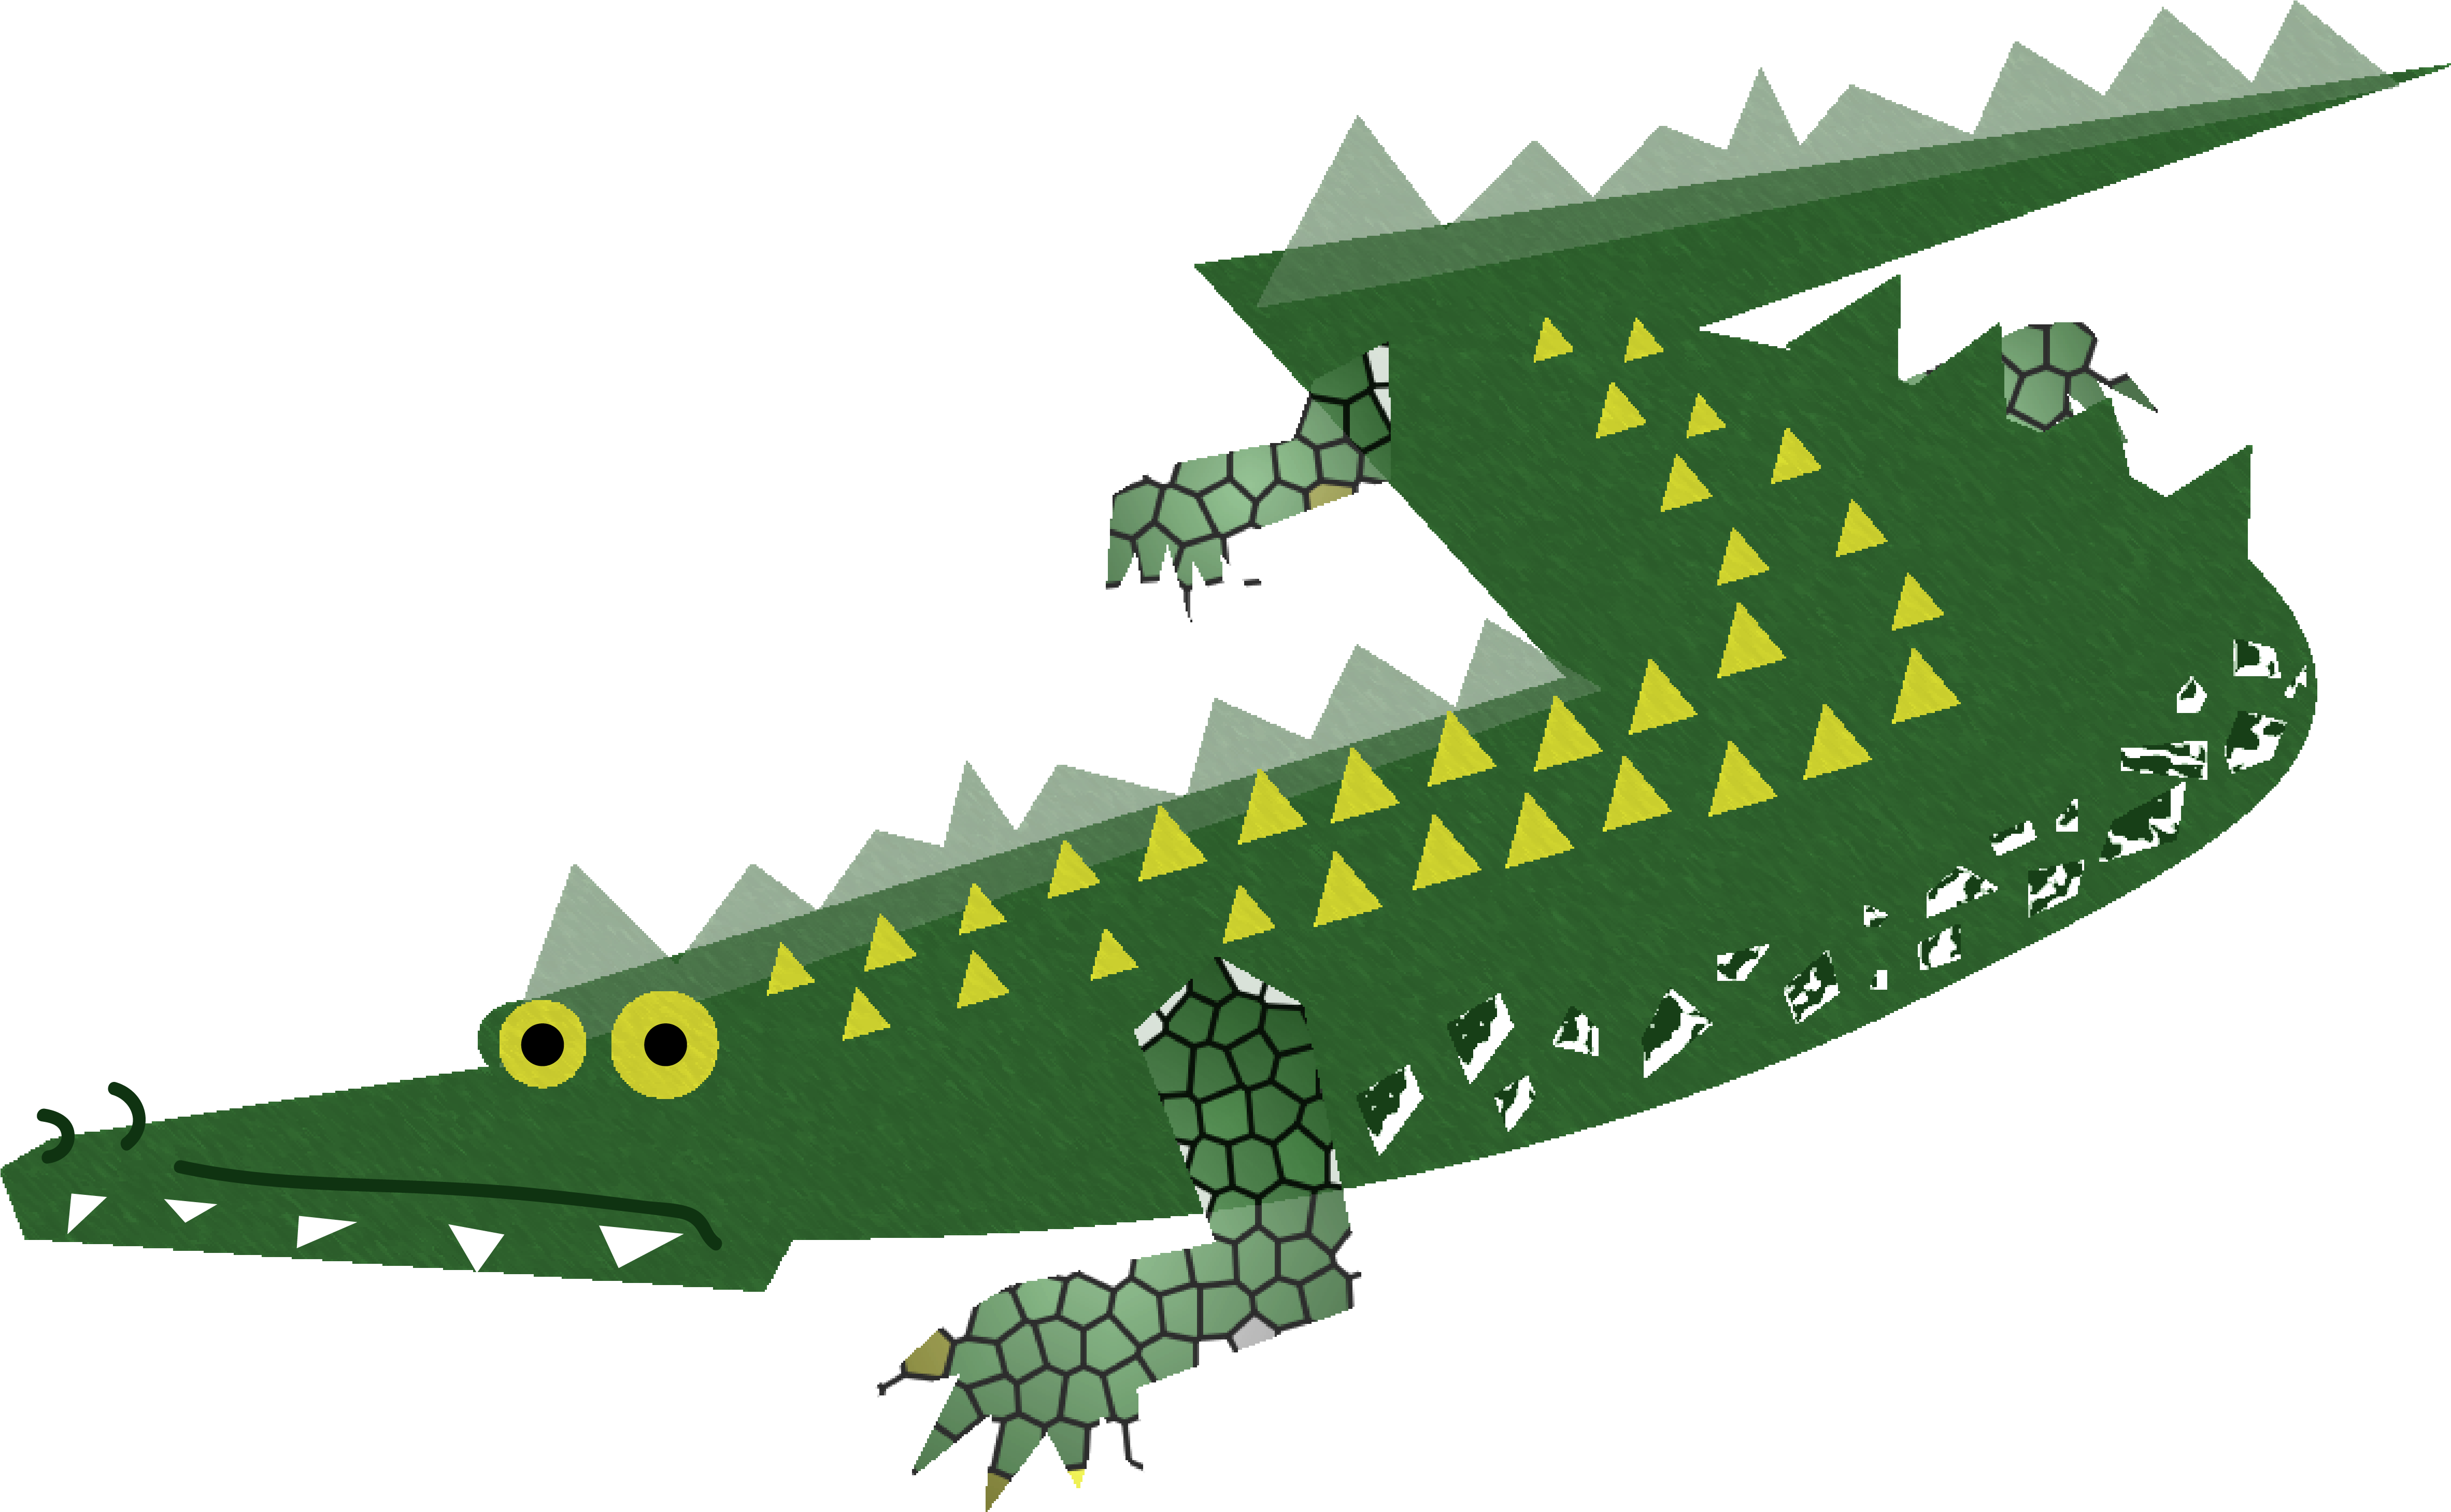 A Green Crocodile With Yellow Triangles